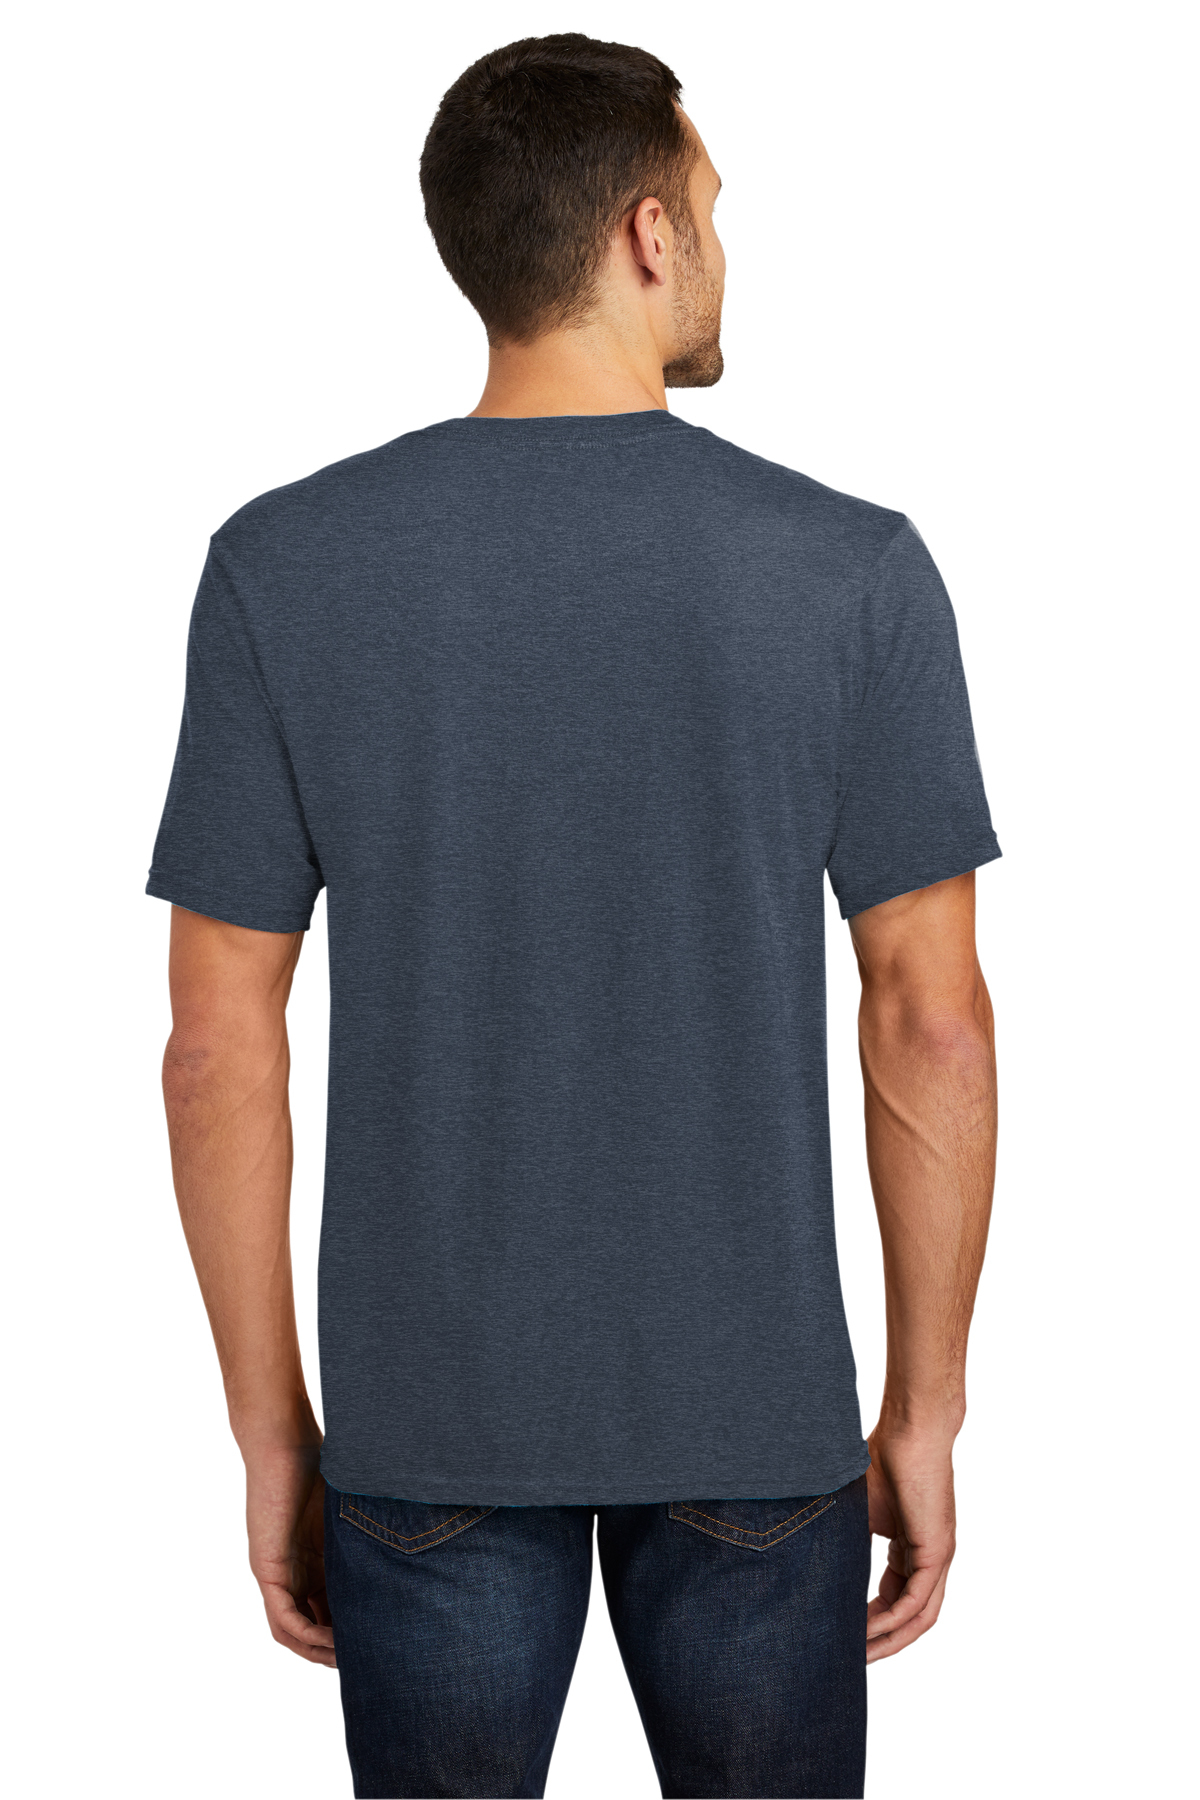 District Very Important Tee V-Neck | Product | District